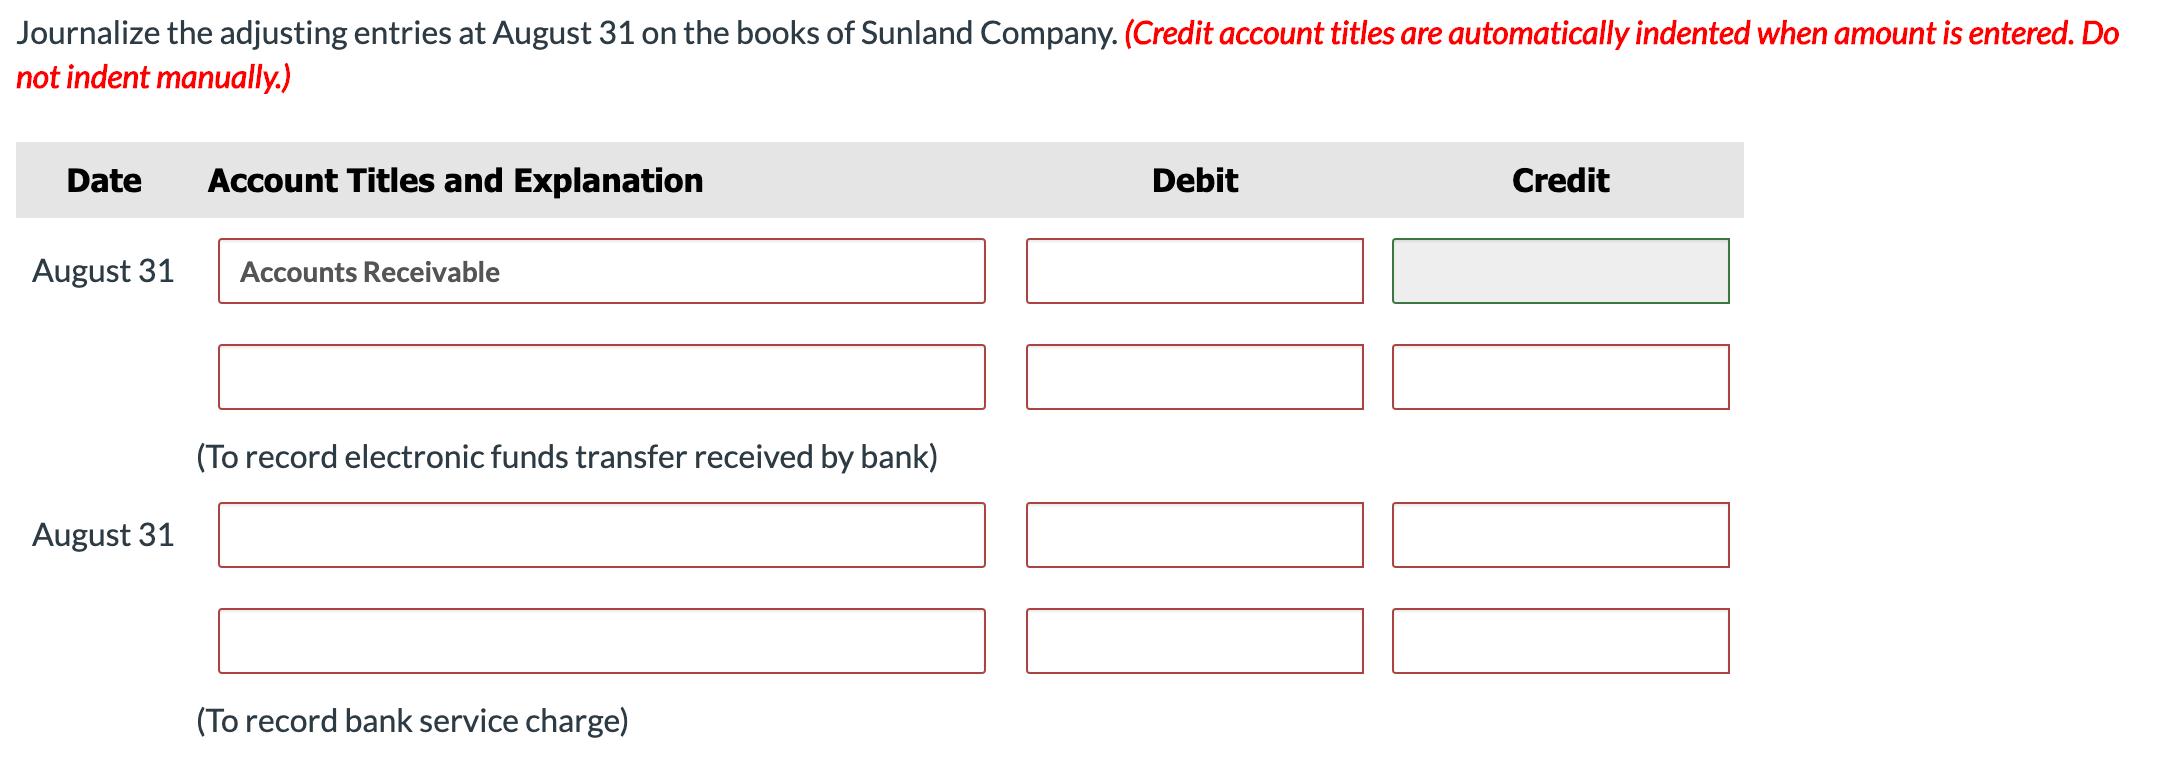 Journalize the adjusting entries at August 31 on the books of Sunland Company. (Credit account titles are